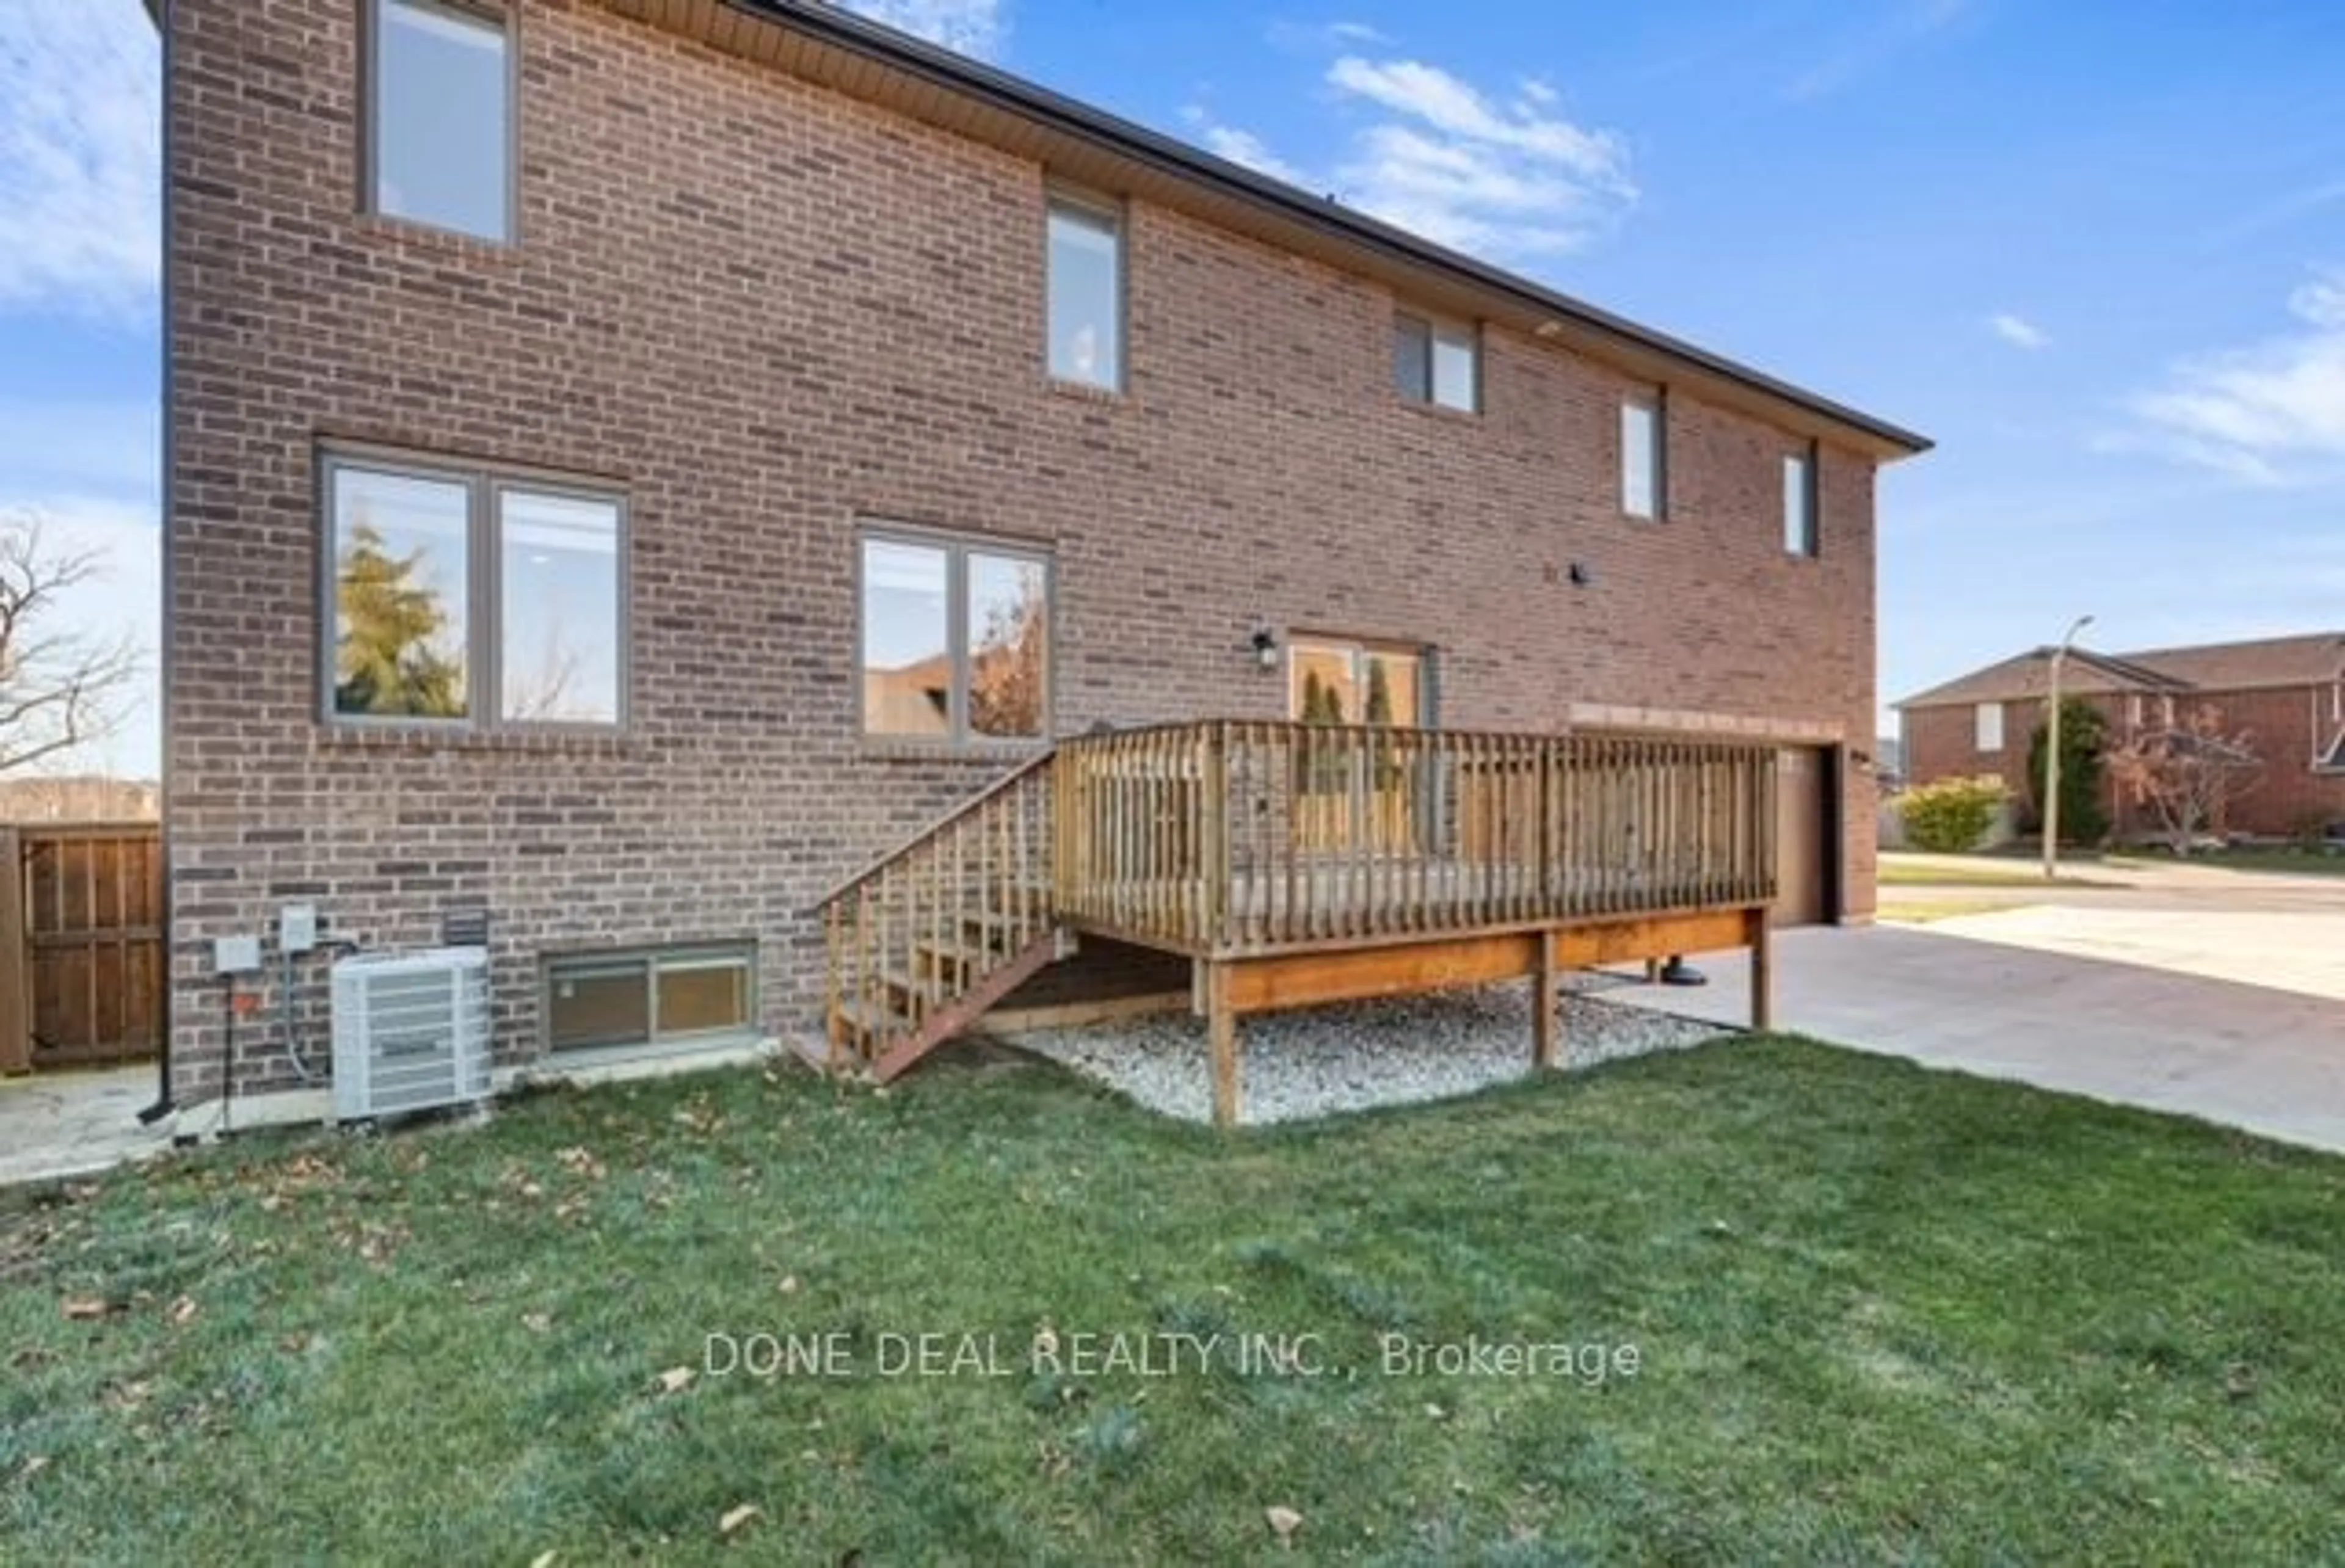 Home with brick exterior material for 1115 Cora Greenwood Dr, Windsor Ontario N8P 1K3